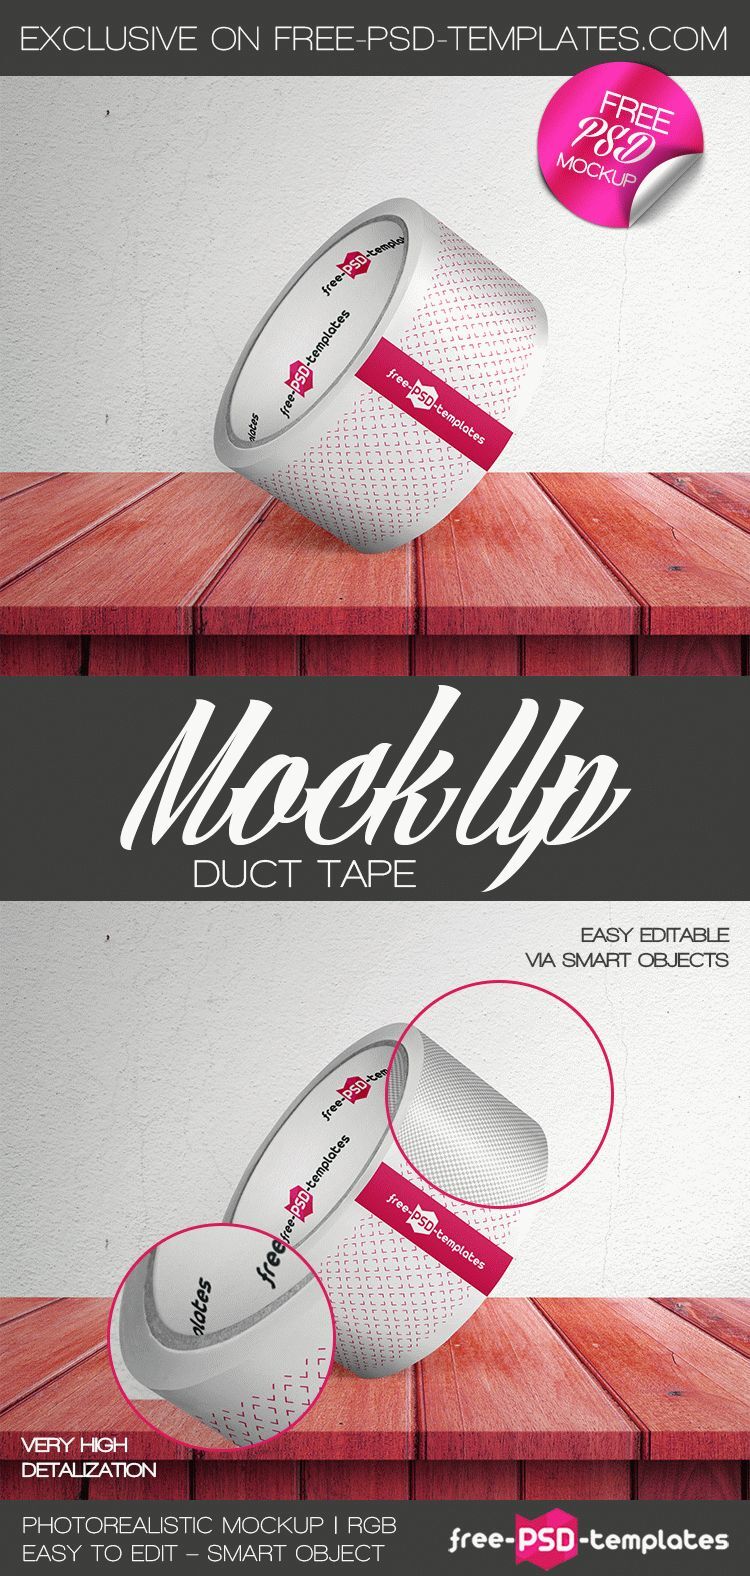 Perspective View Patterned Duct Tape with Box Mockup (FREE